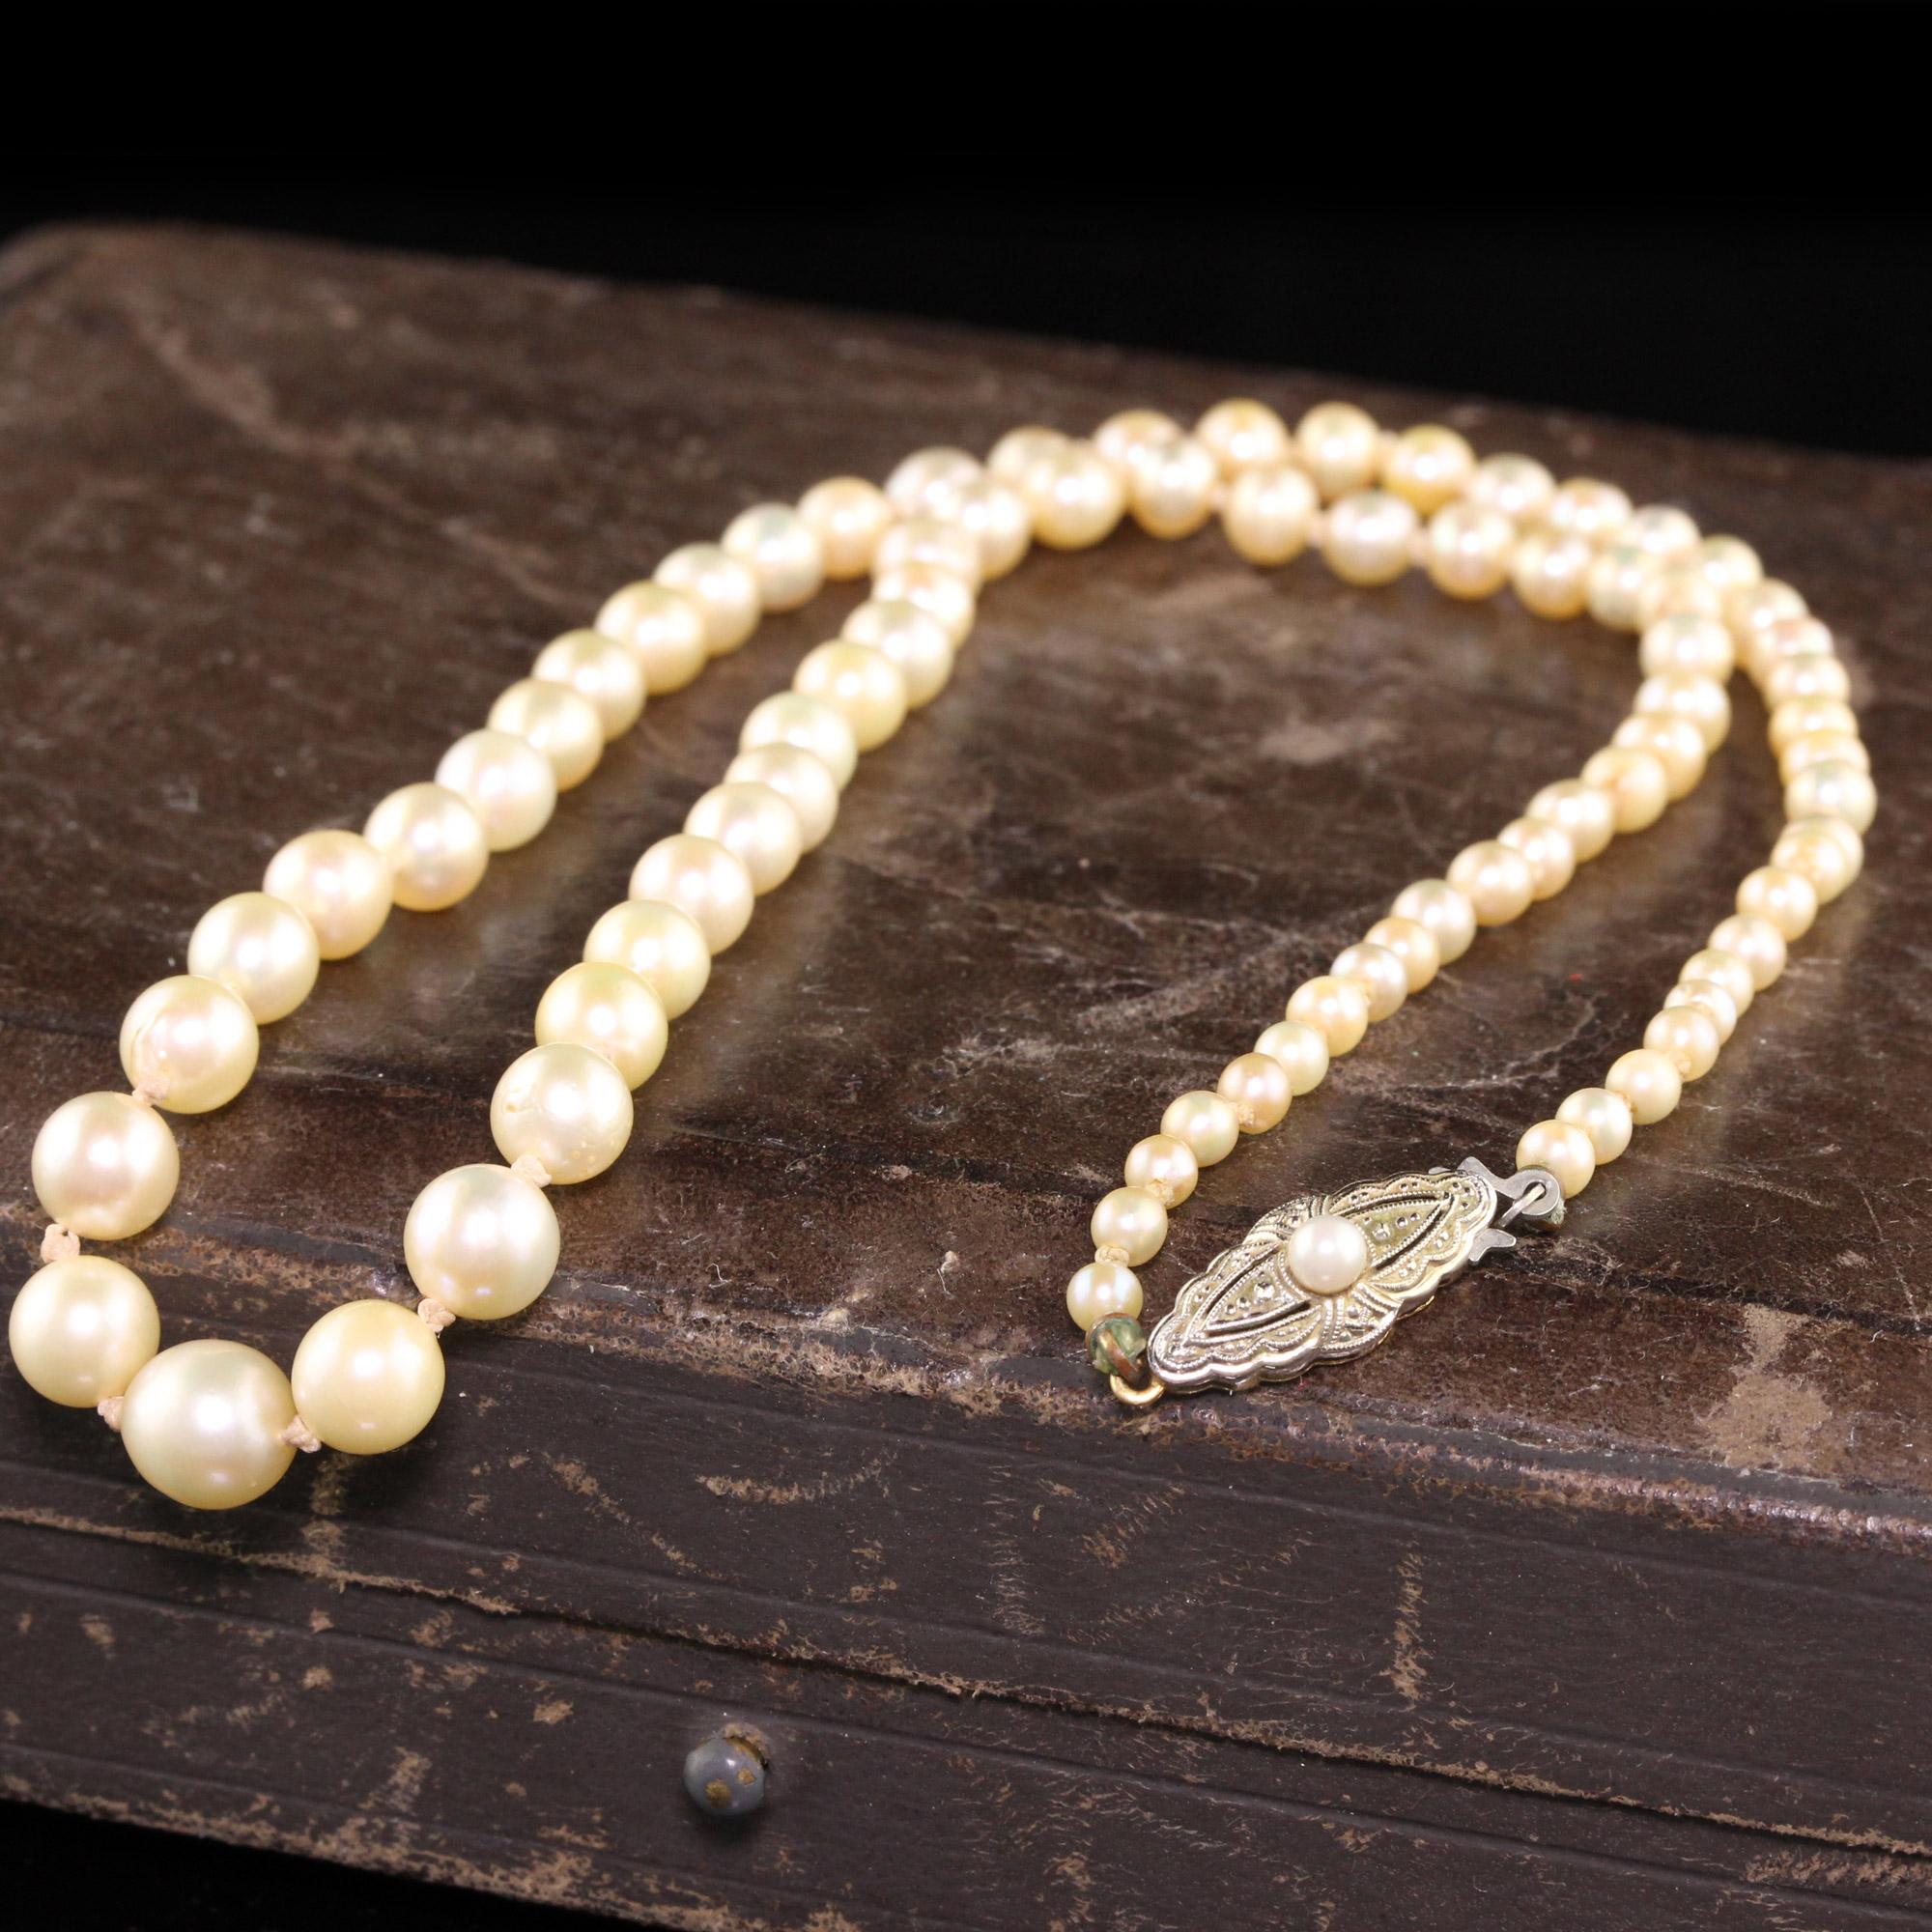 Beautiful Antique Art Deco 18K Yellow Gold Natural Pearl Akoya Pearl Strand Necklace. This classic strand of pearls has a GIA report on it stating that the pearls are saltwater Akoya and has 2 natural pearls as well on the strand.

Item